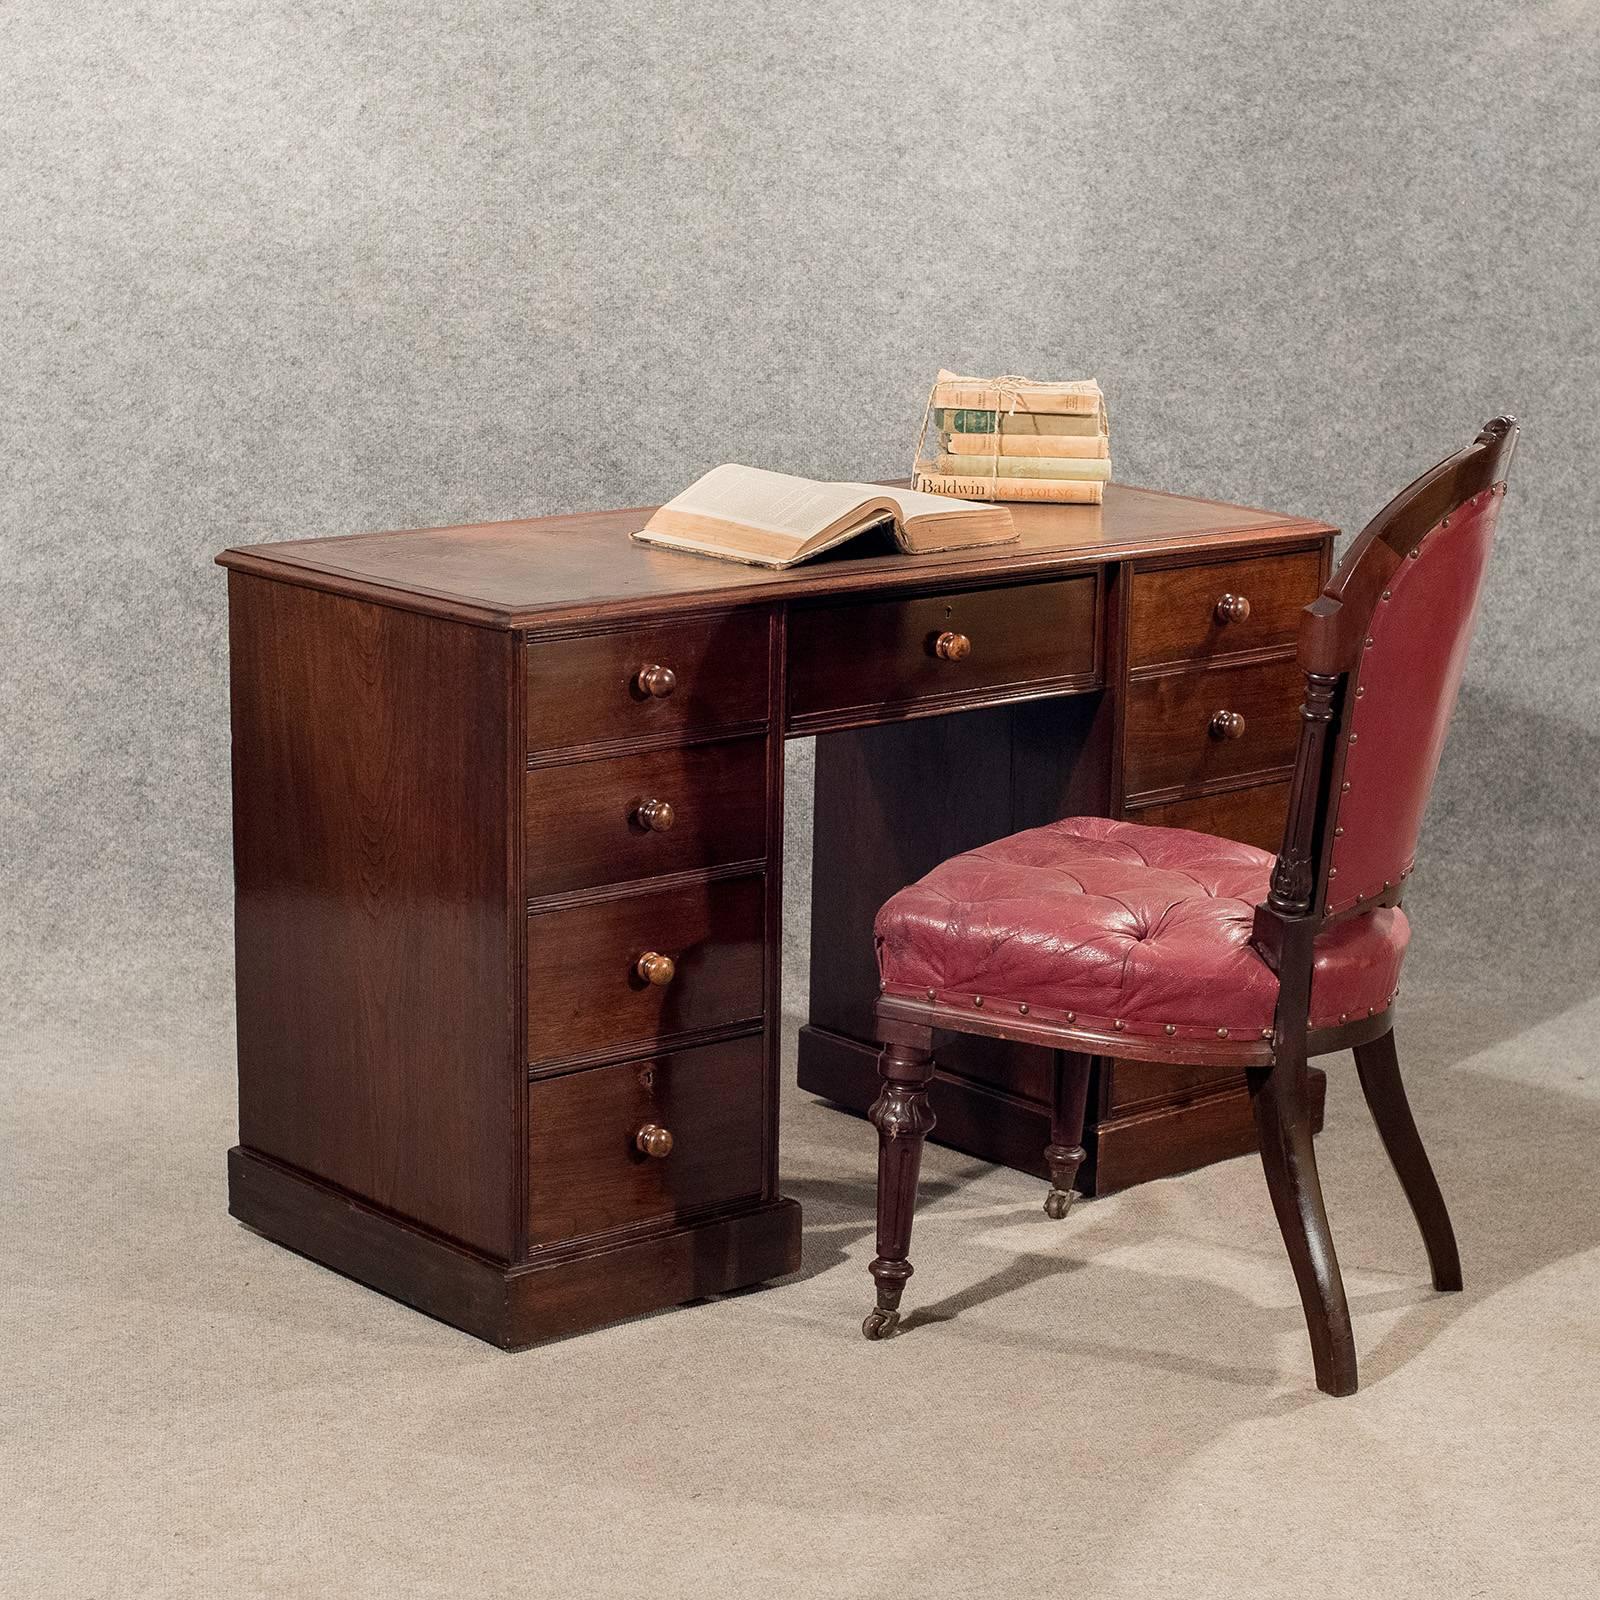 A quality original Victorian writing study desk presented in very good antique condition
Of interest displaying quality throughout with dovetail joints and single construction
In attractive mahogany with a desirable tone
Rising from hidden